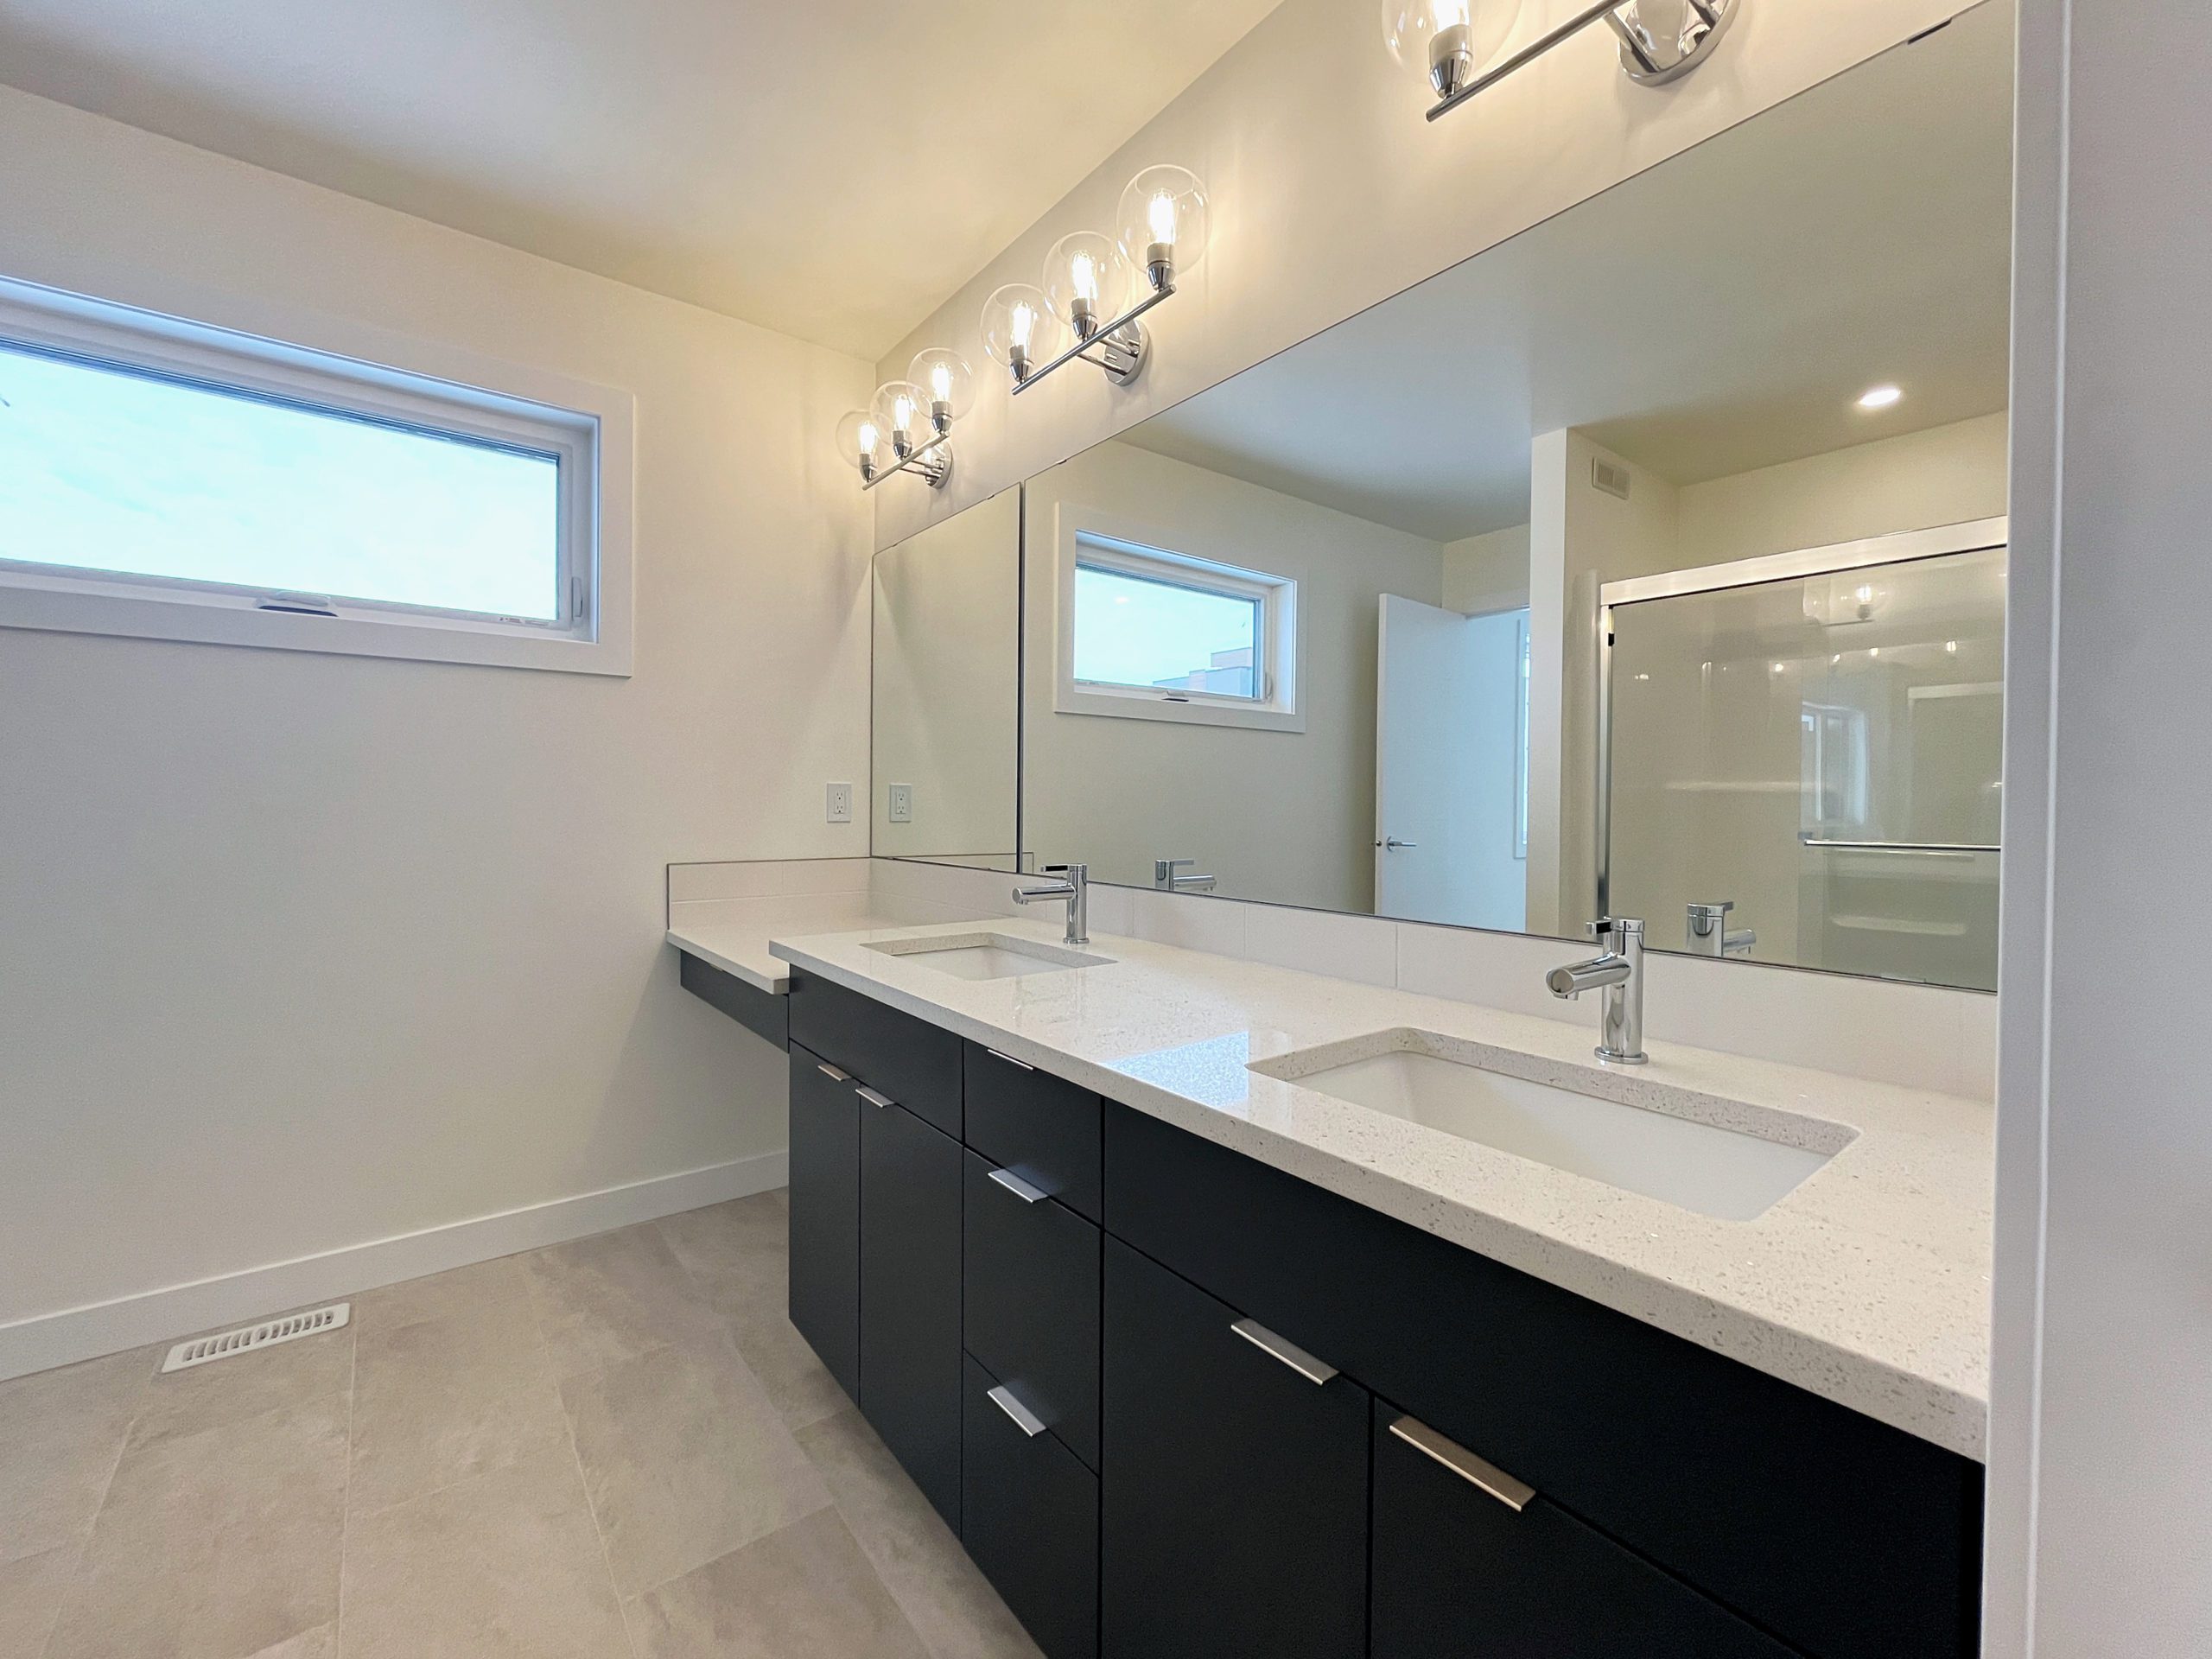 Double-sink and makeup counter in the ensuite bathroom.